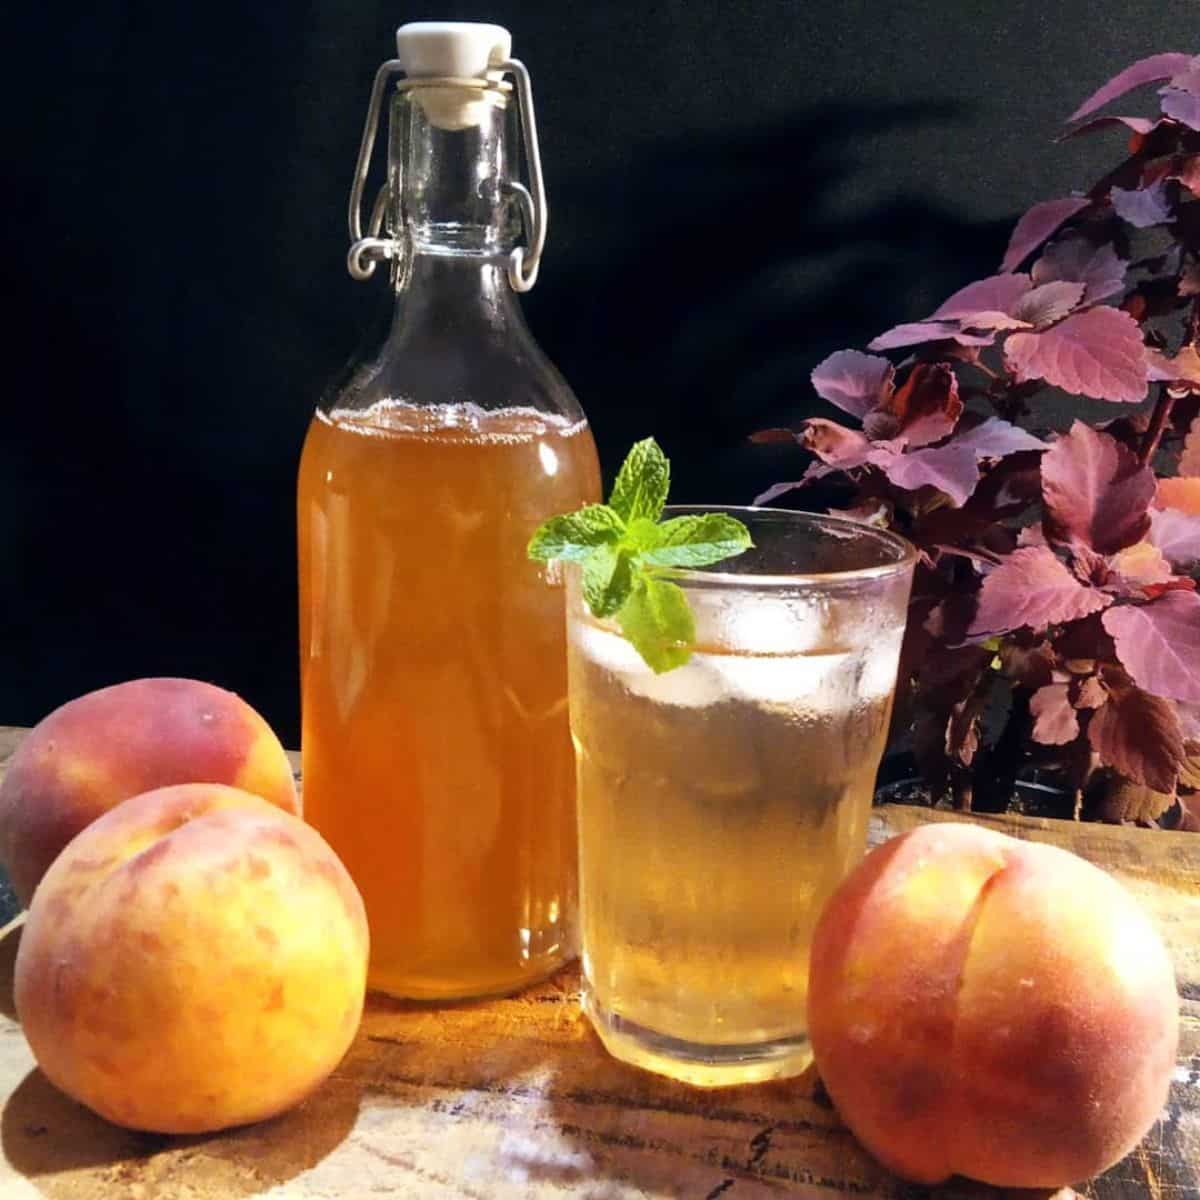 Peach syrup, fresh peaches, and a cold glass of drink